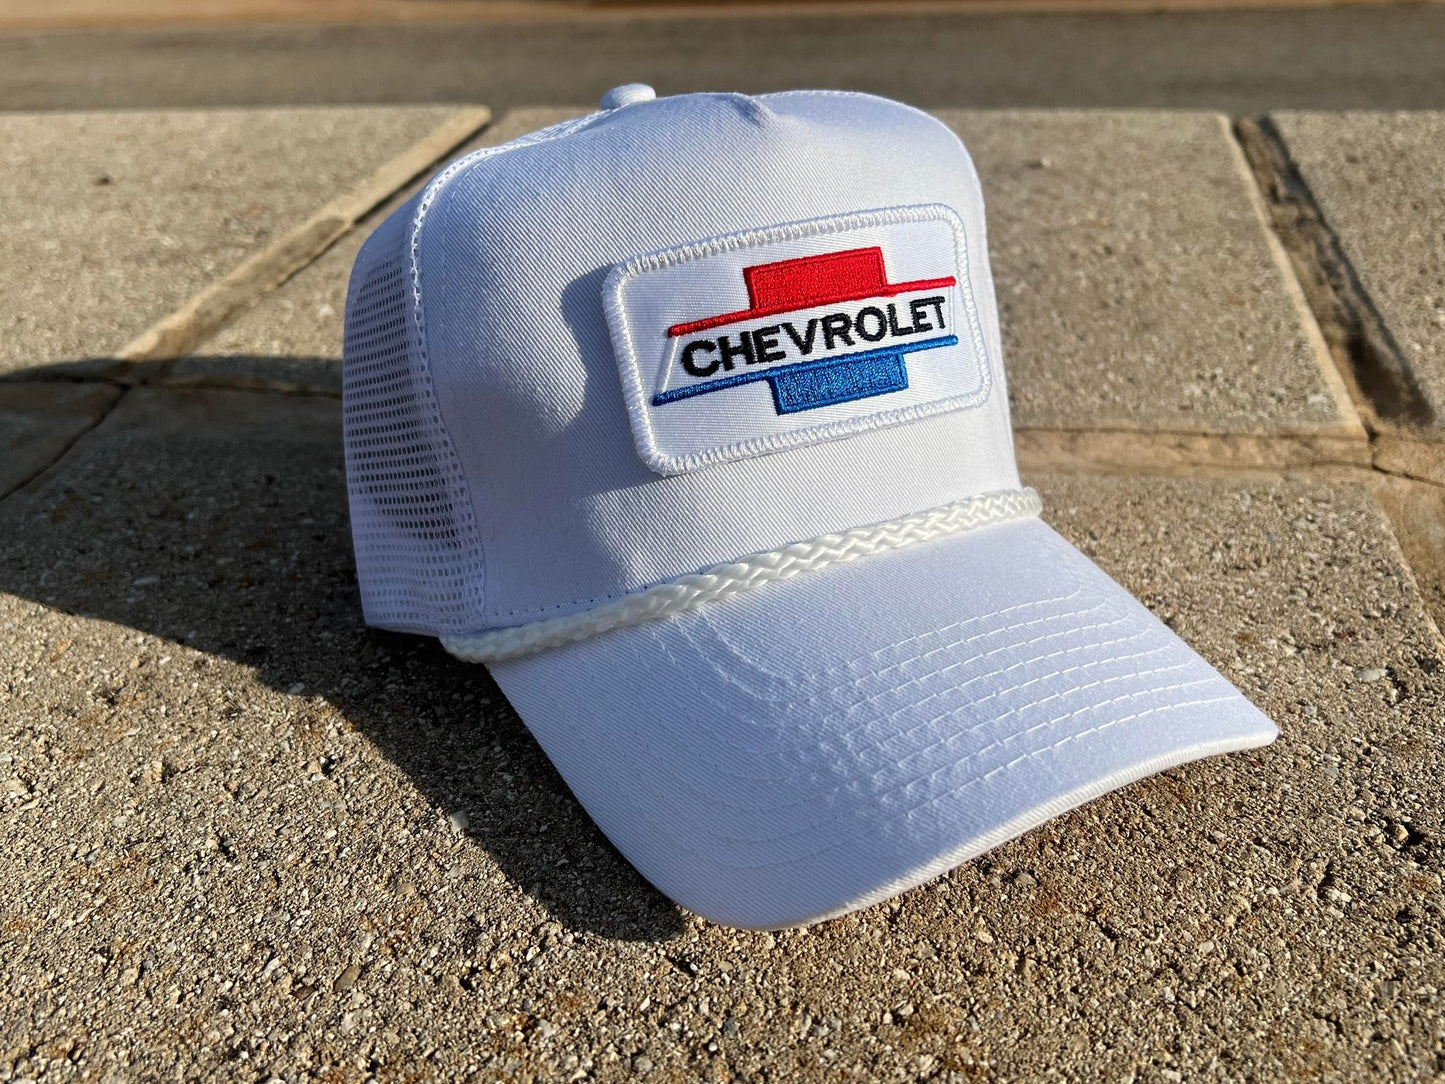 Vintage Chevrolet Rope Snapback Trucker Mesh Hat with Chevy Patch - Classic Chevy Truck Apparel for Men and Women